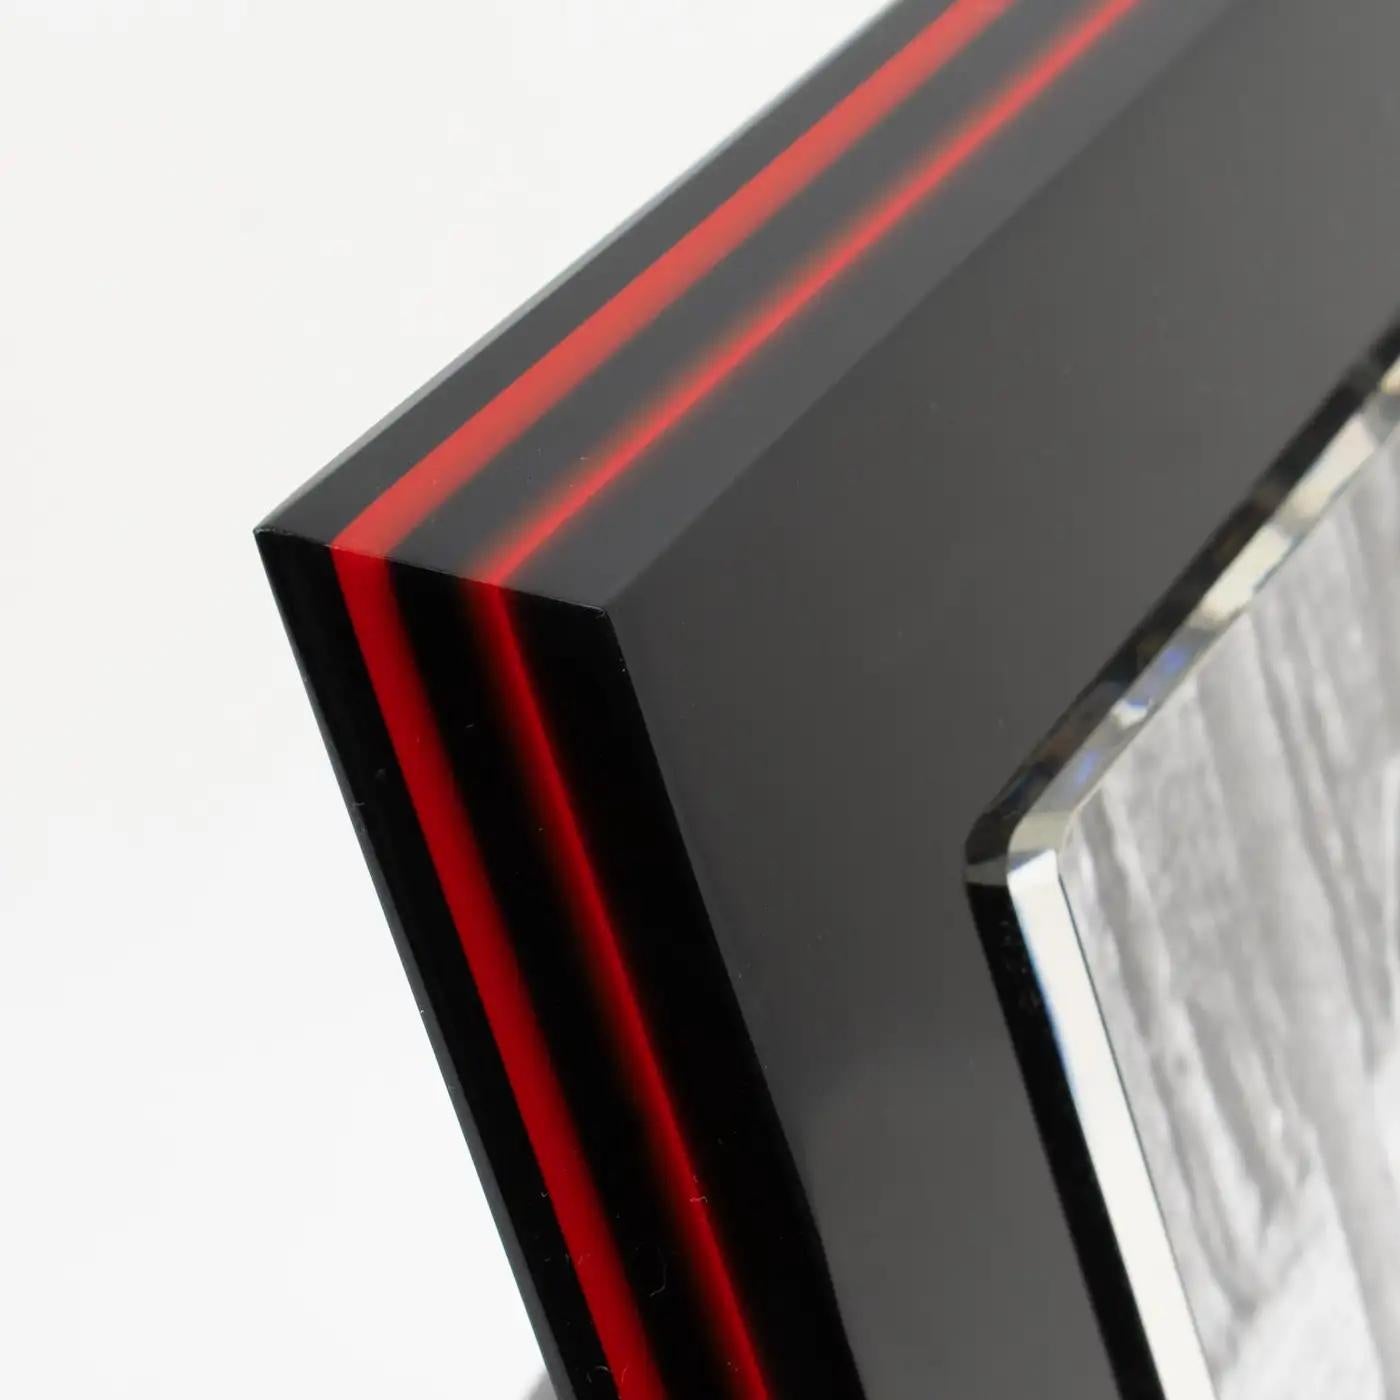 Rede Guzzini Black and Red Lucite Picture Frame, Italy 1970s For Sale 1